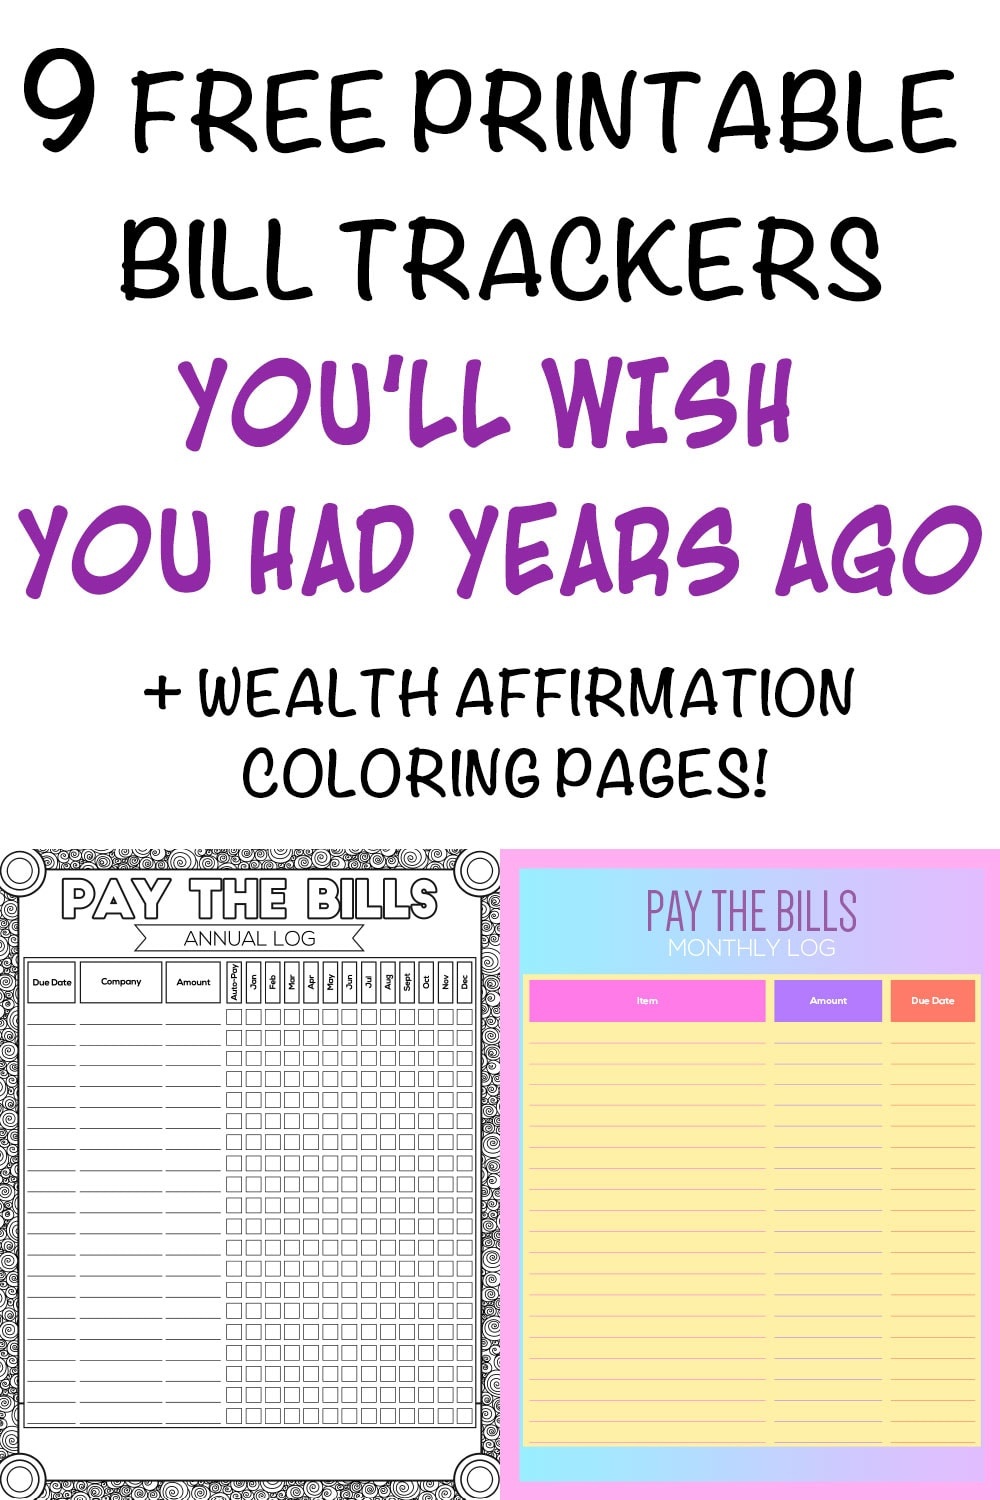 9 Printable Bill Payment Checklists And Bill Trackers - The Artisan Life - Free Printable Monthly Bill Checklist